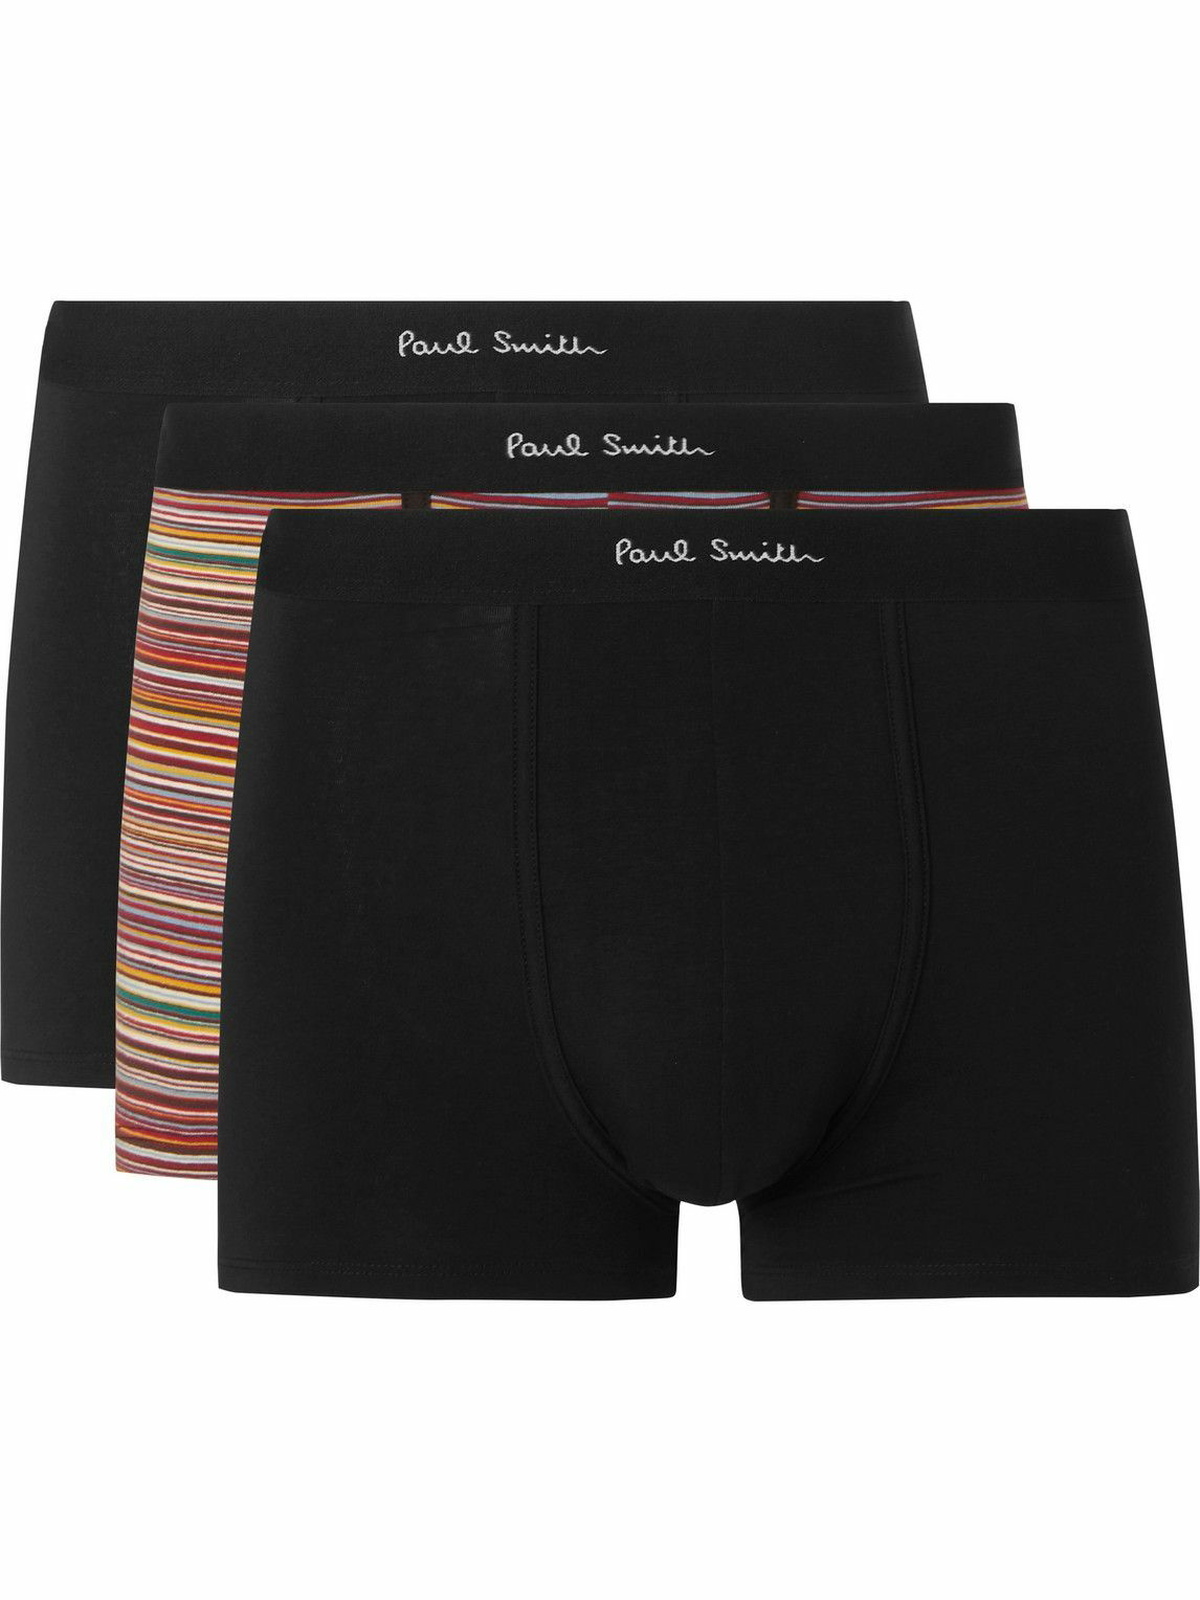 Paul Smith - Three-Pack Stretch-Cotton Boxer Briefs - Black Paul Smith